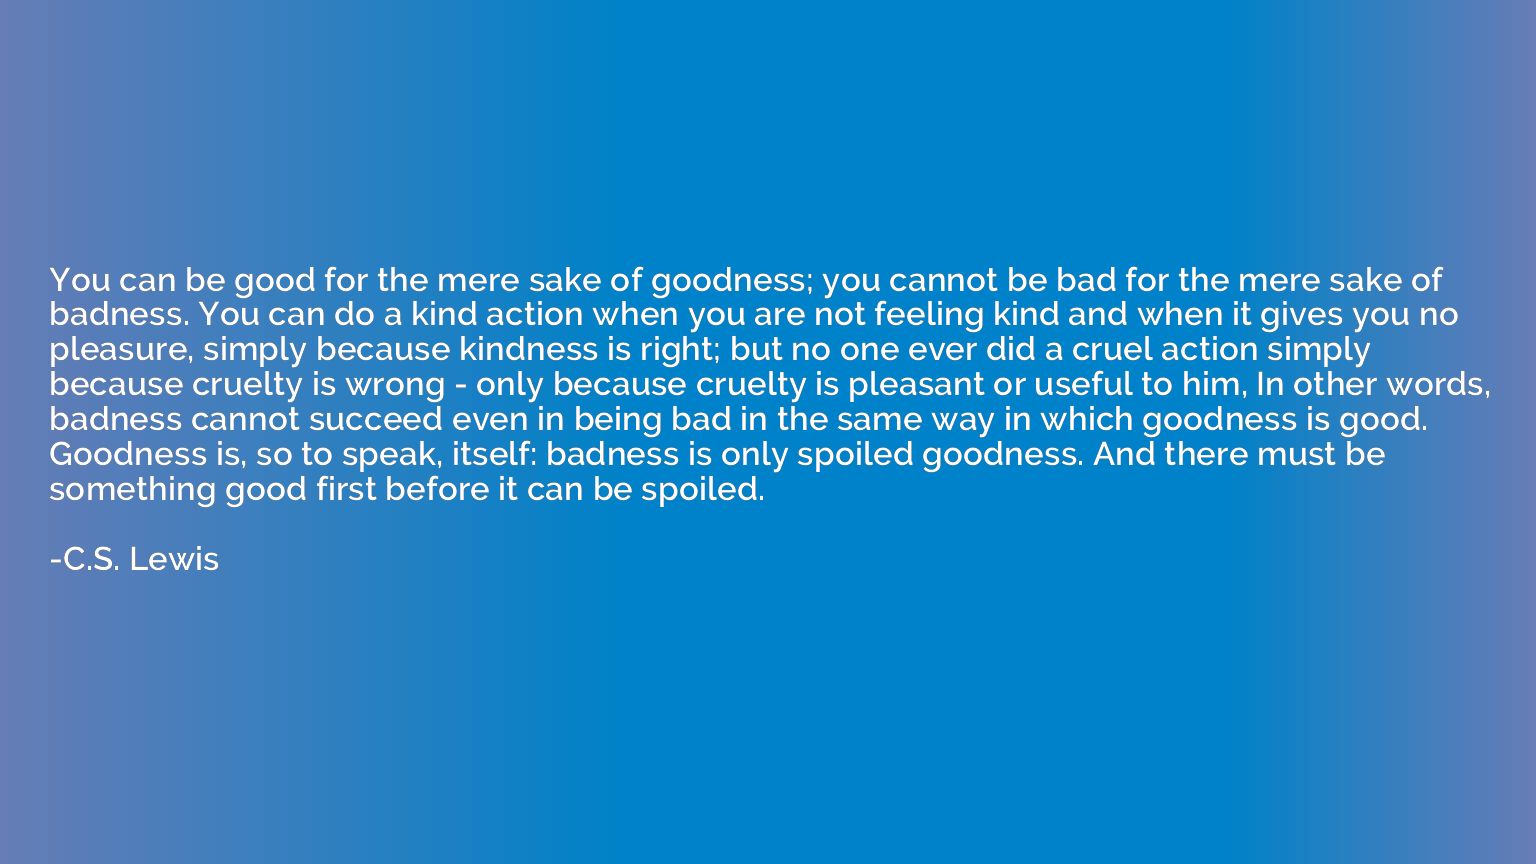 You can be good for the mere sake of goodness; you cannot be